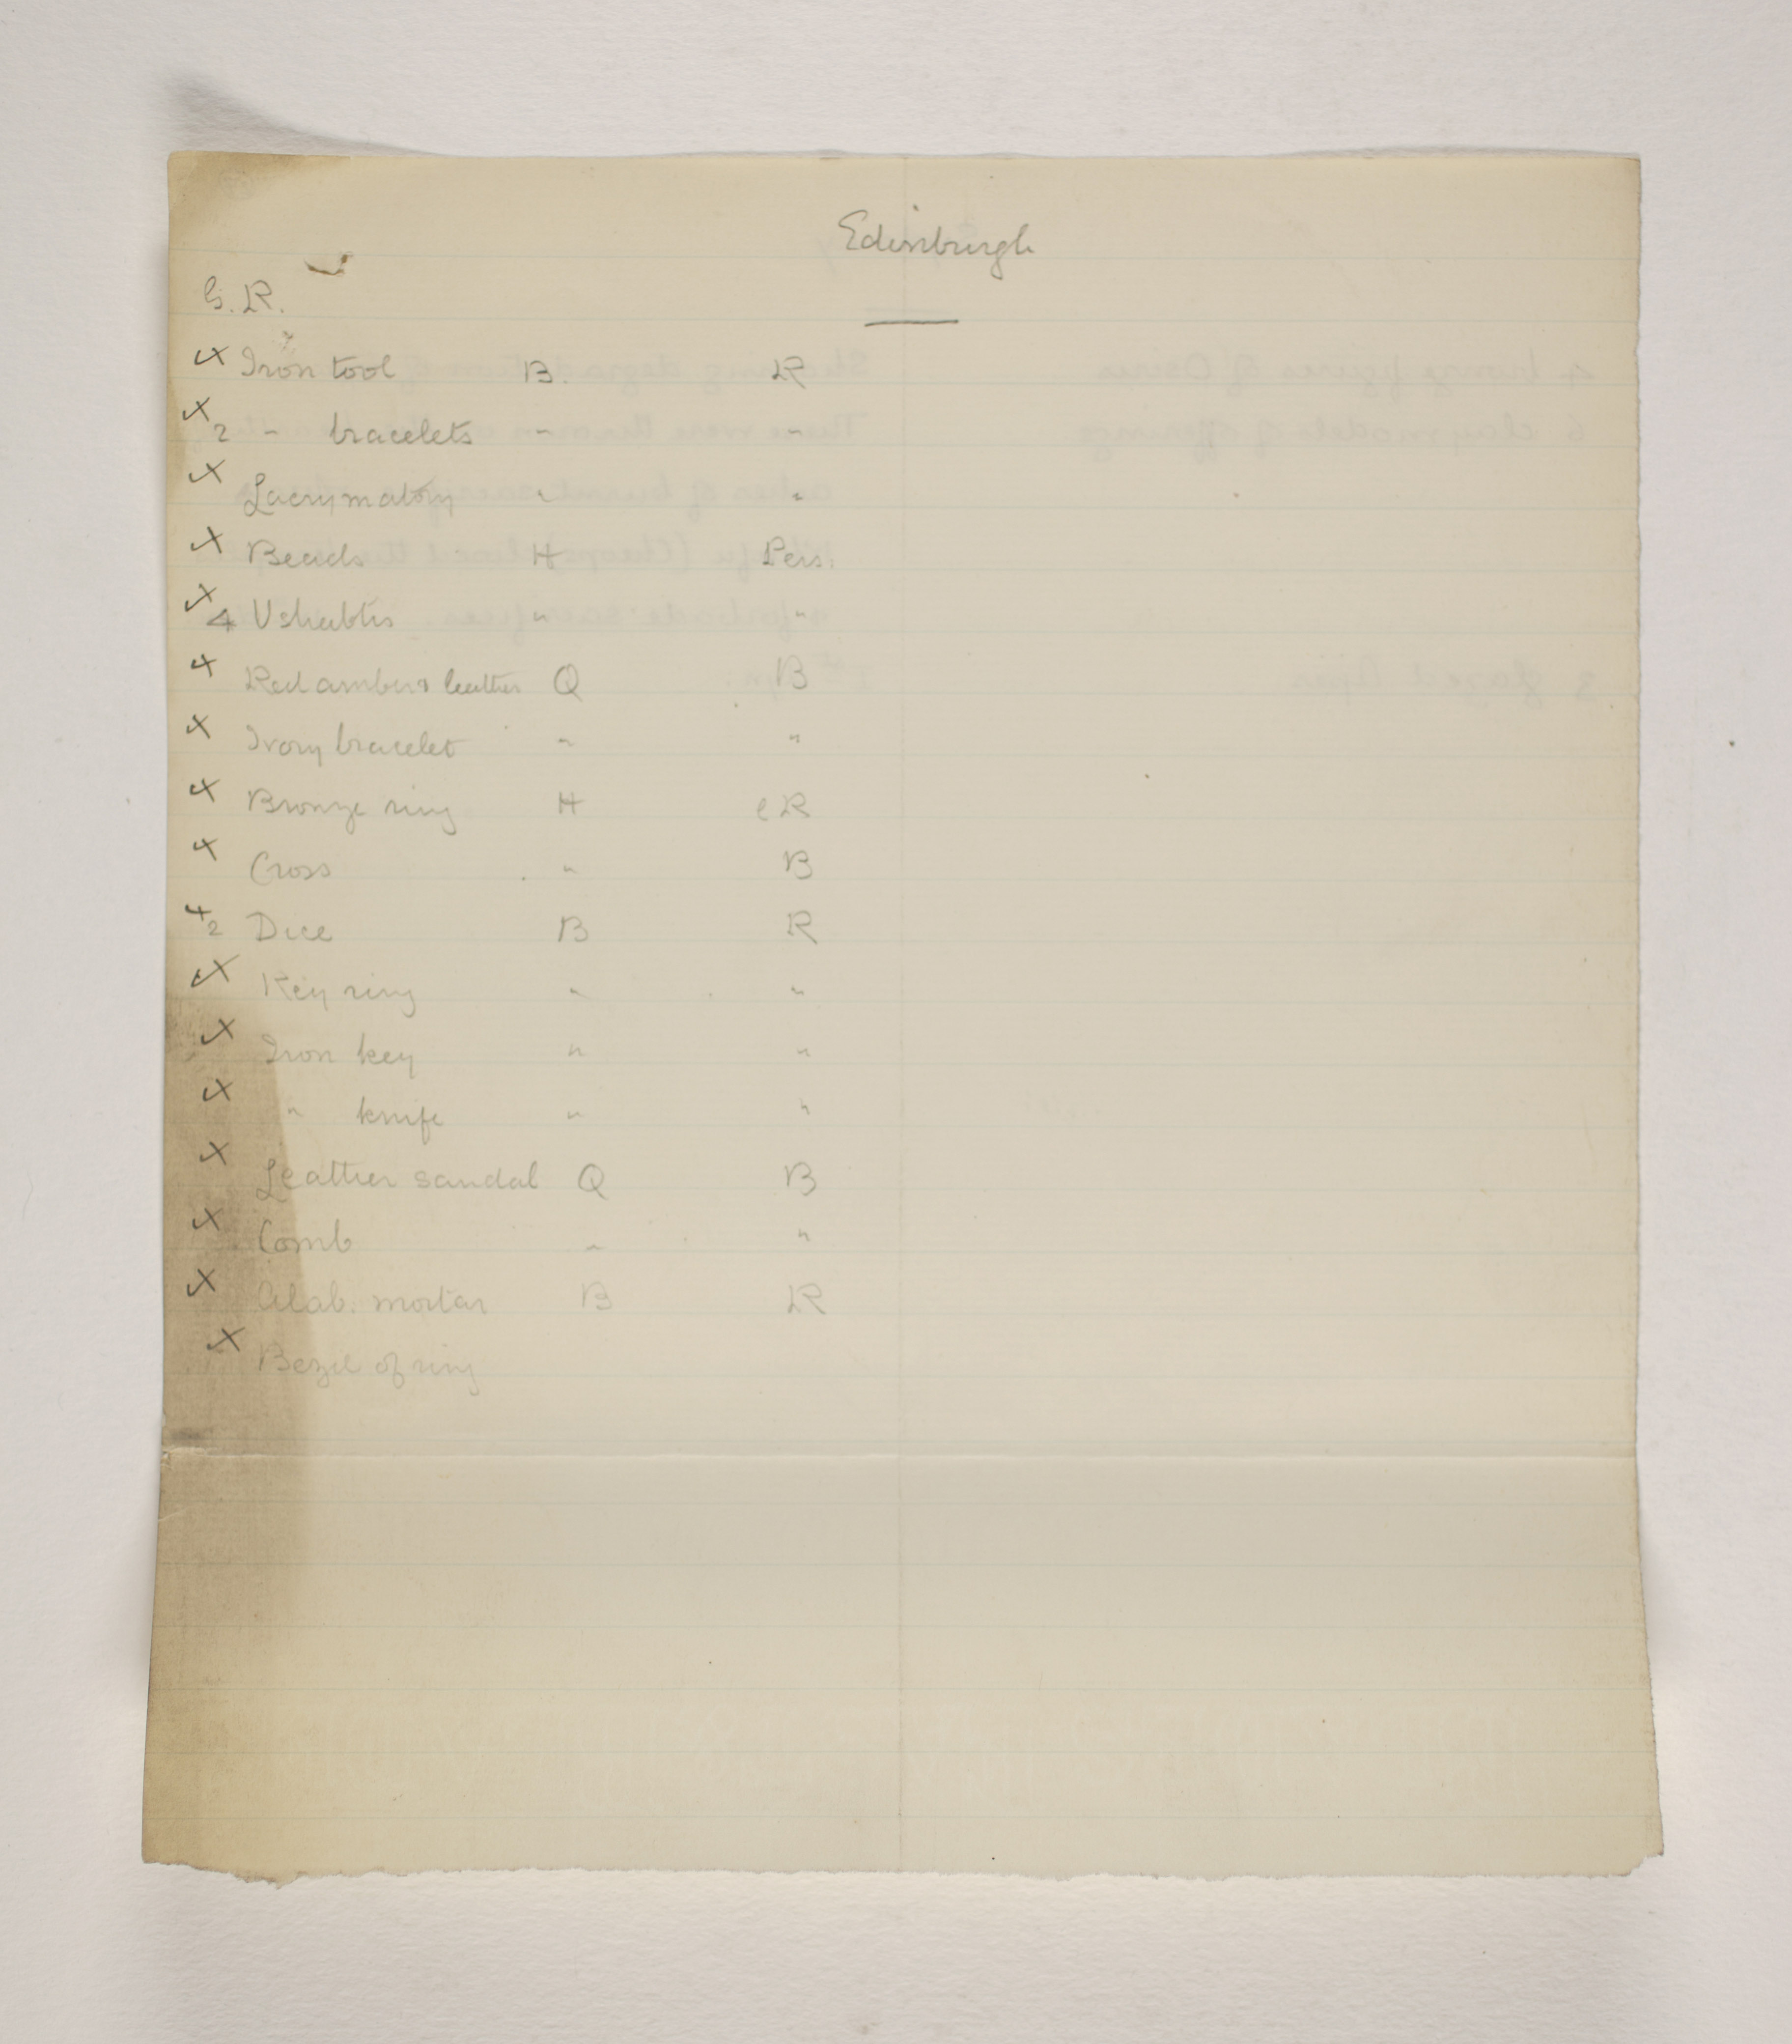 1902-03 Abydos Individual institution list  PMA/WFP1/D/11/27.1